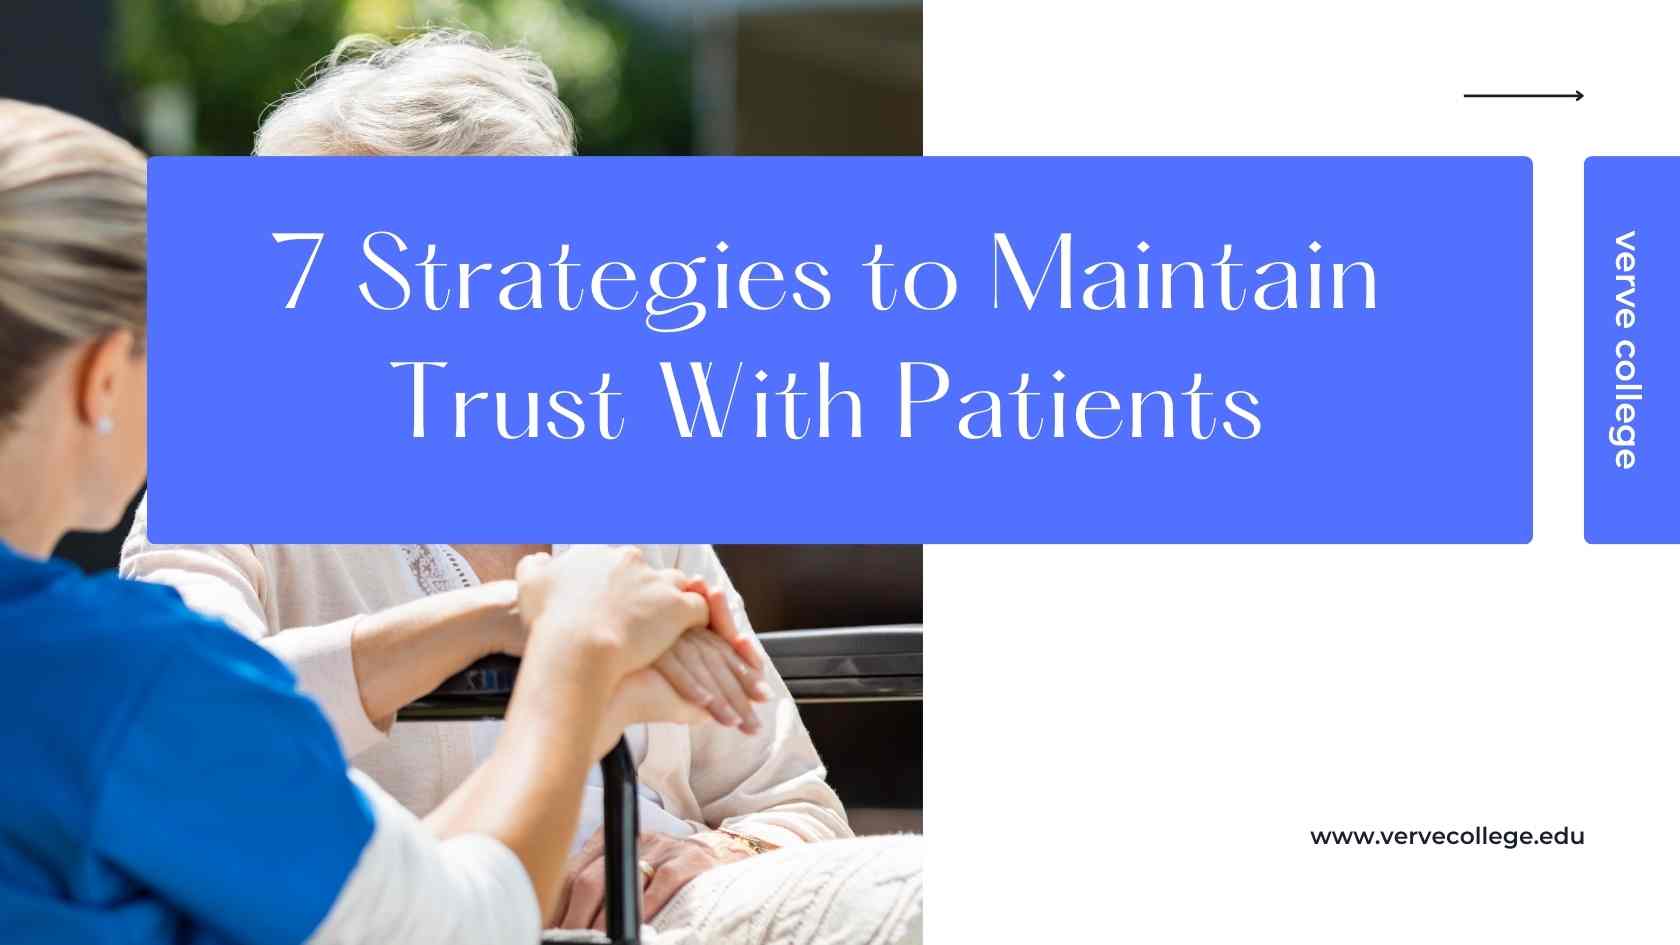 7 Strategies to Maintain Trust With Patients